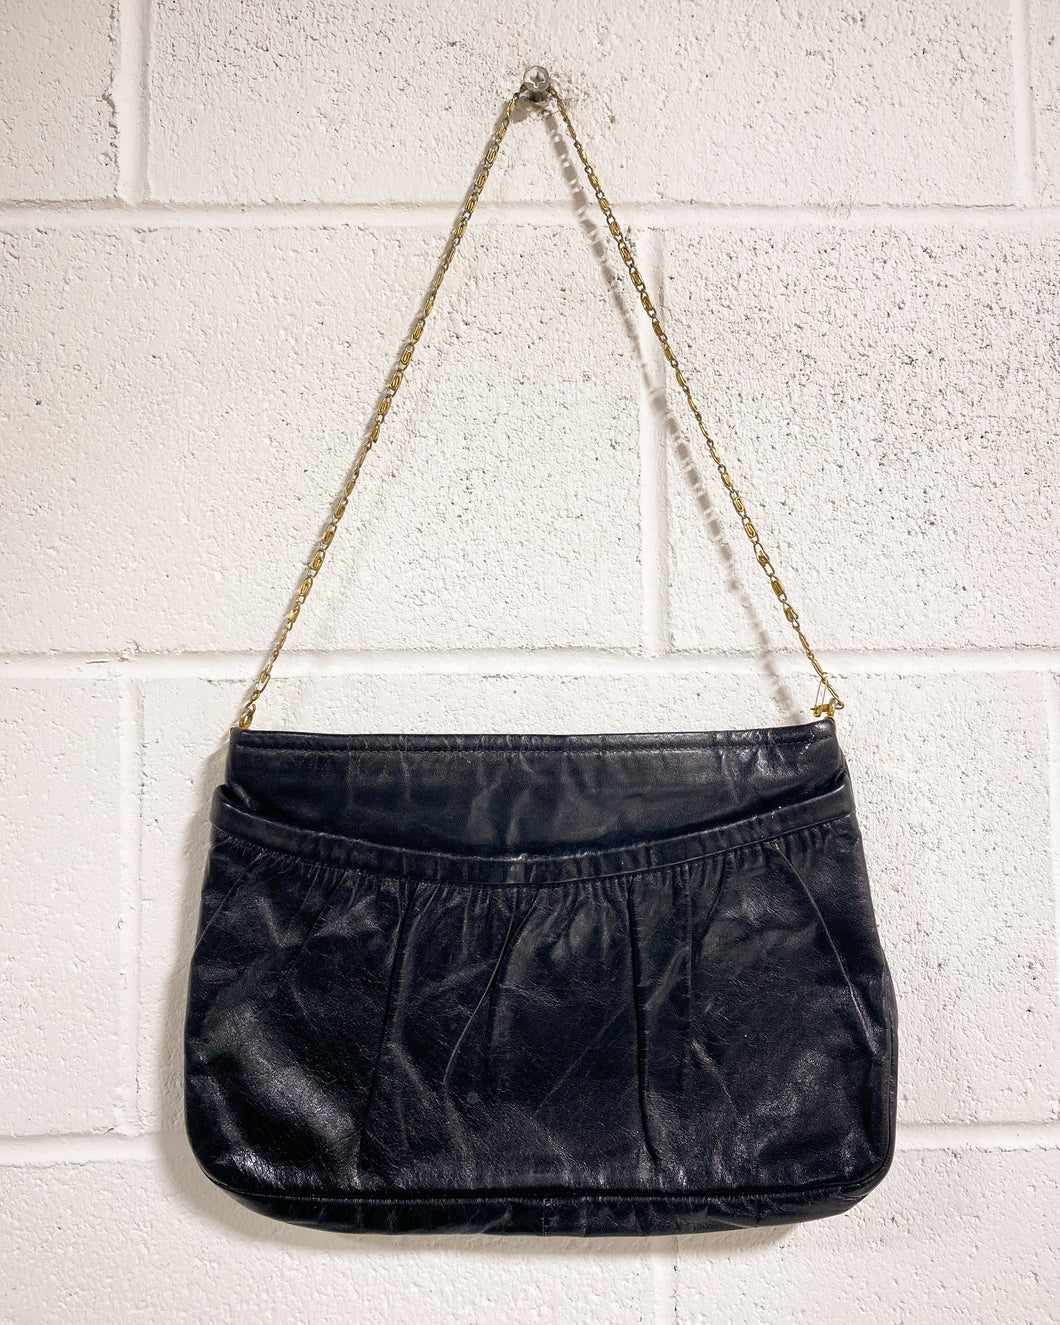 Black Leather Purse with Gold Chain